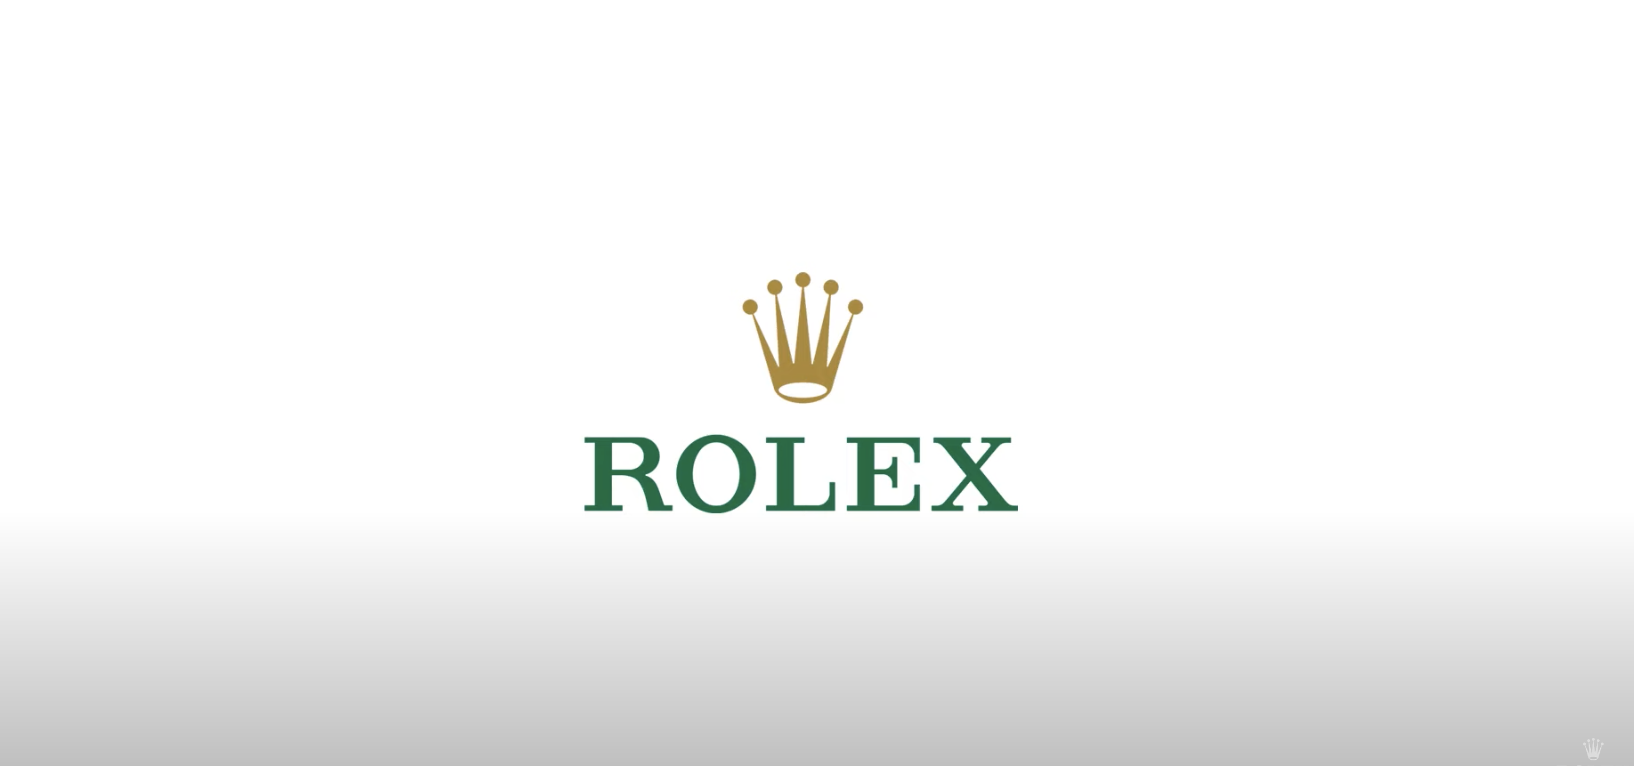 The new Rolex Air-King